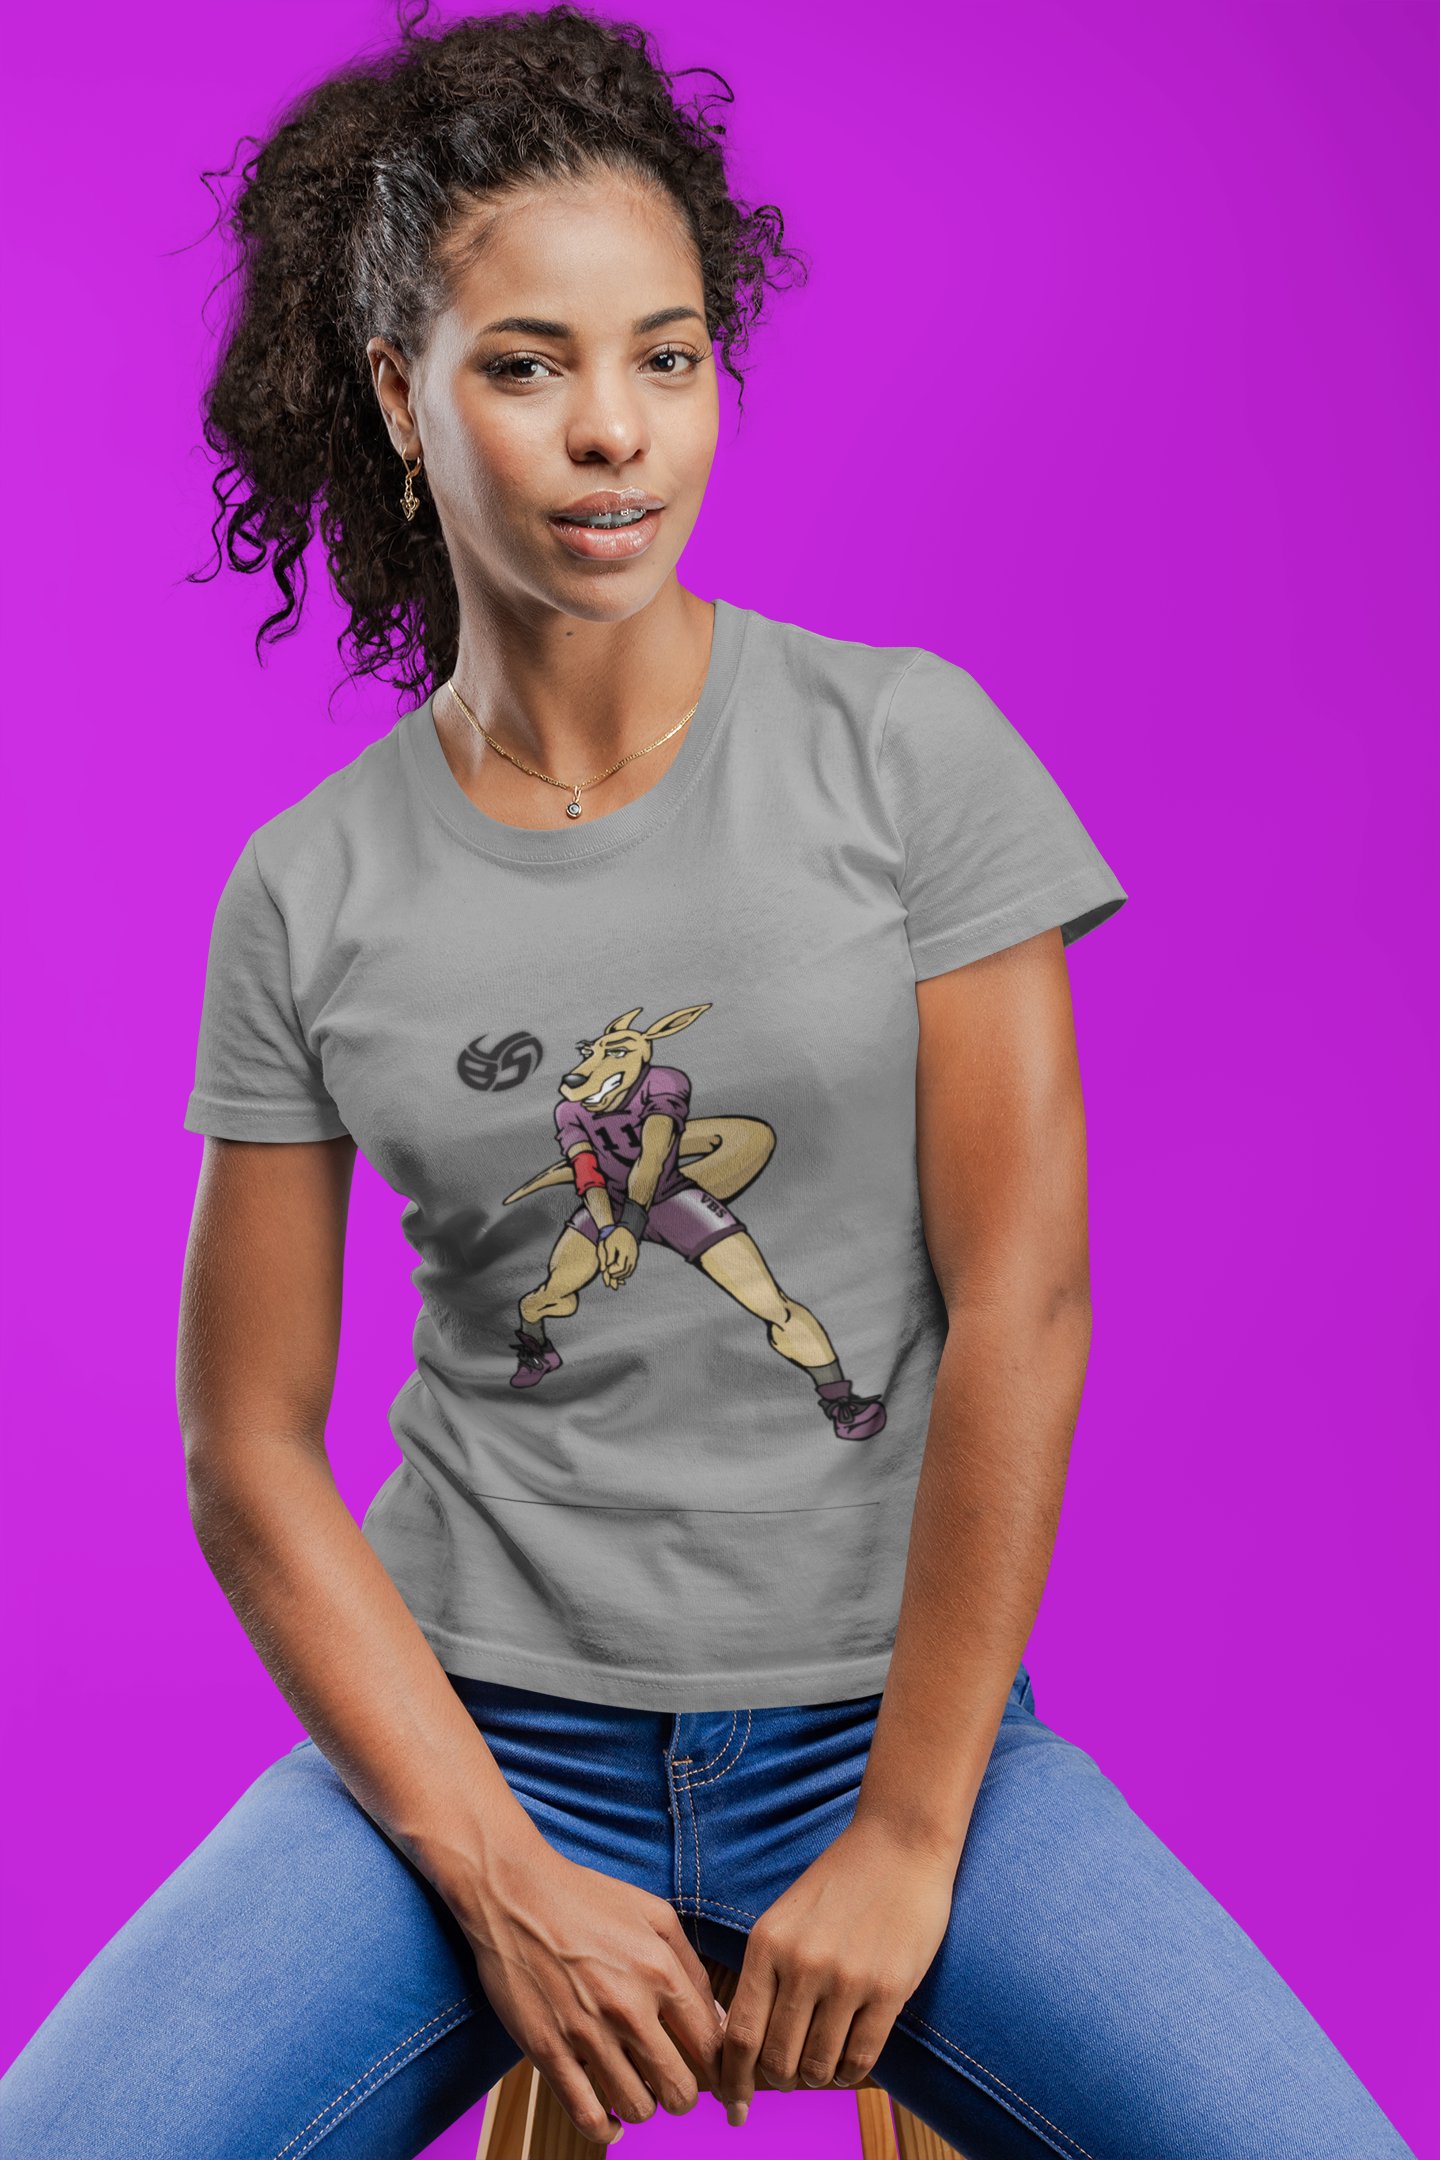 Click to Shop Volleybragswag Kangaroo T Shirt Designs Featuring Hitter Resee The Roo on Etsy. These make great additions to your back to school or volleyball practice outfits.